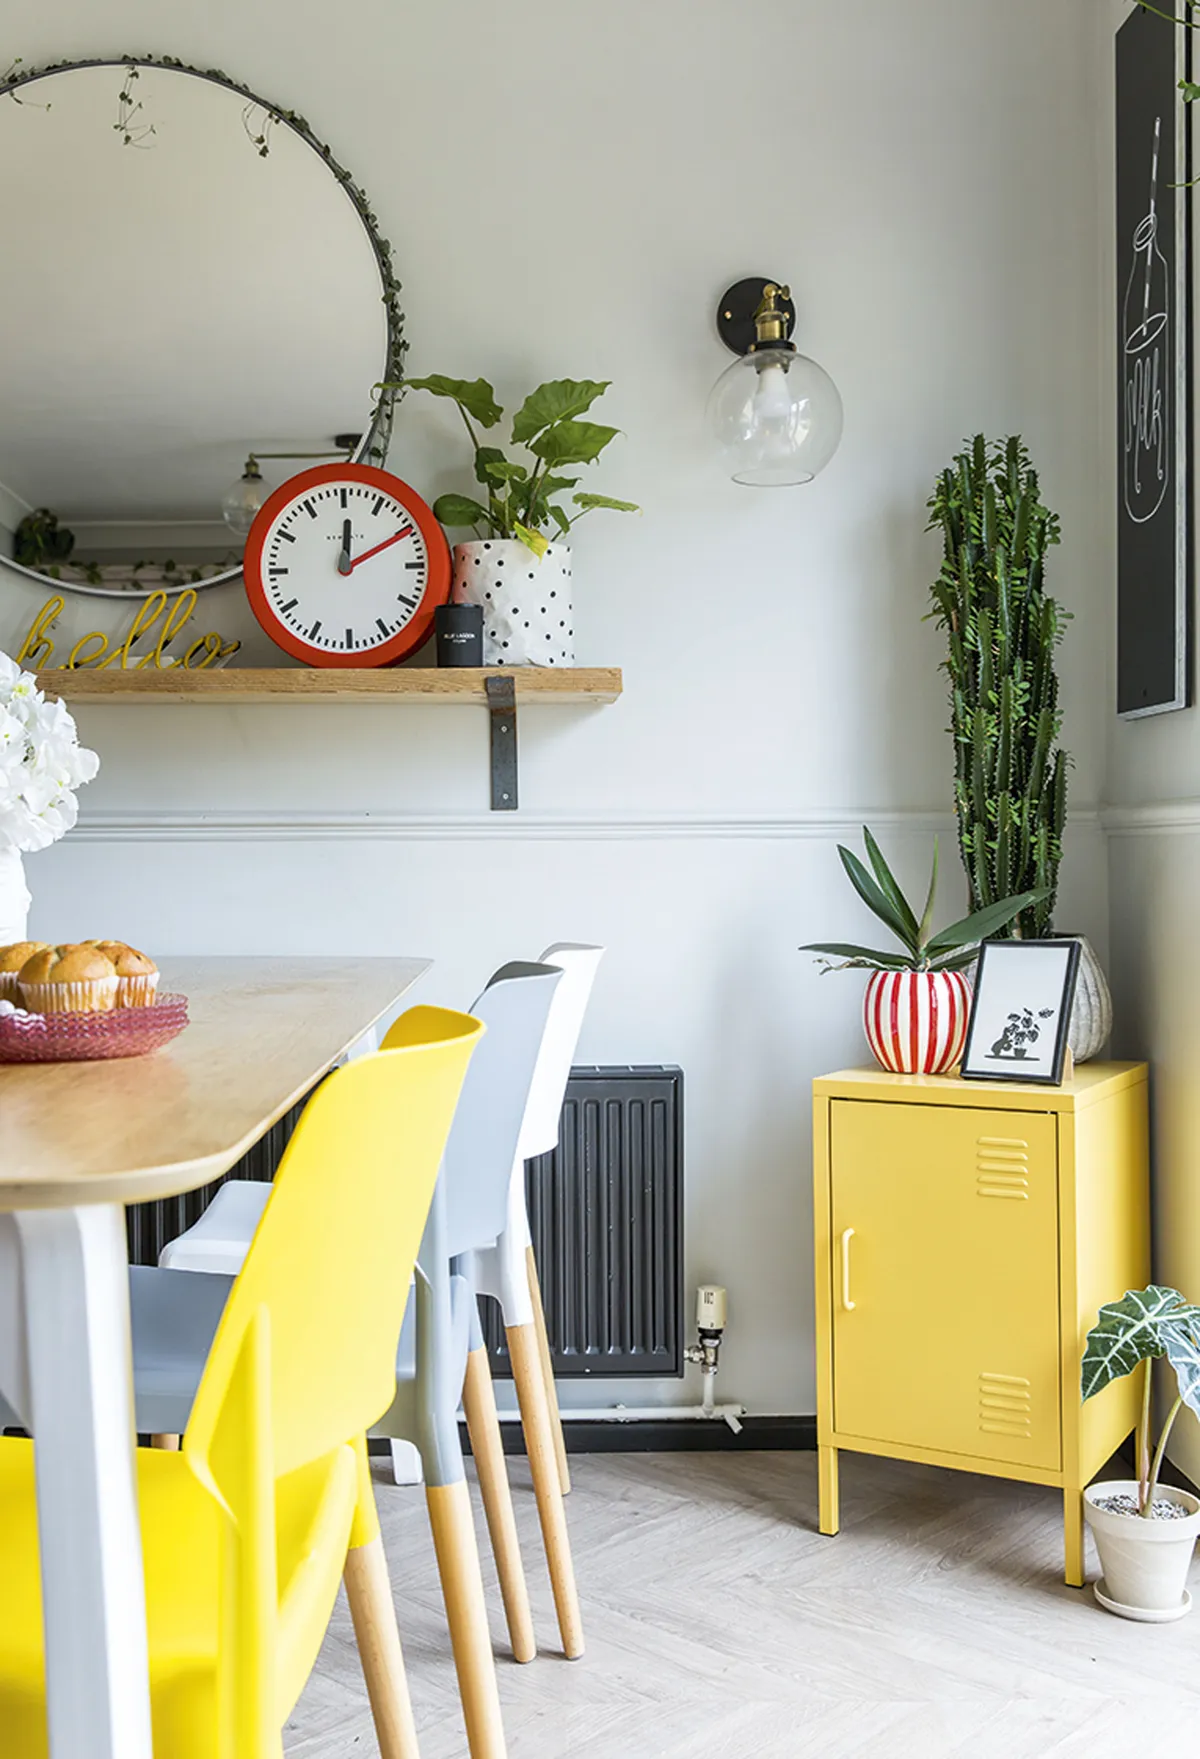 Kitchen makeover: 'We gave our kitchen a retro revamp for under £900'